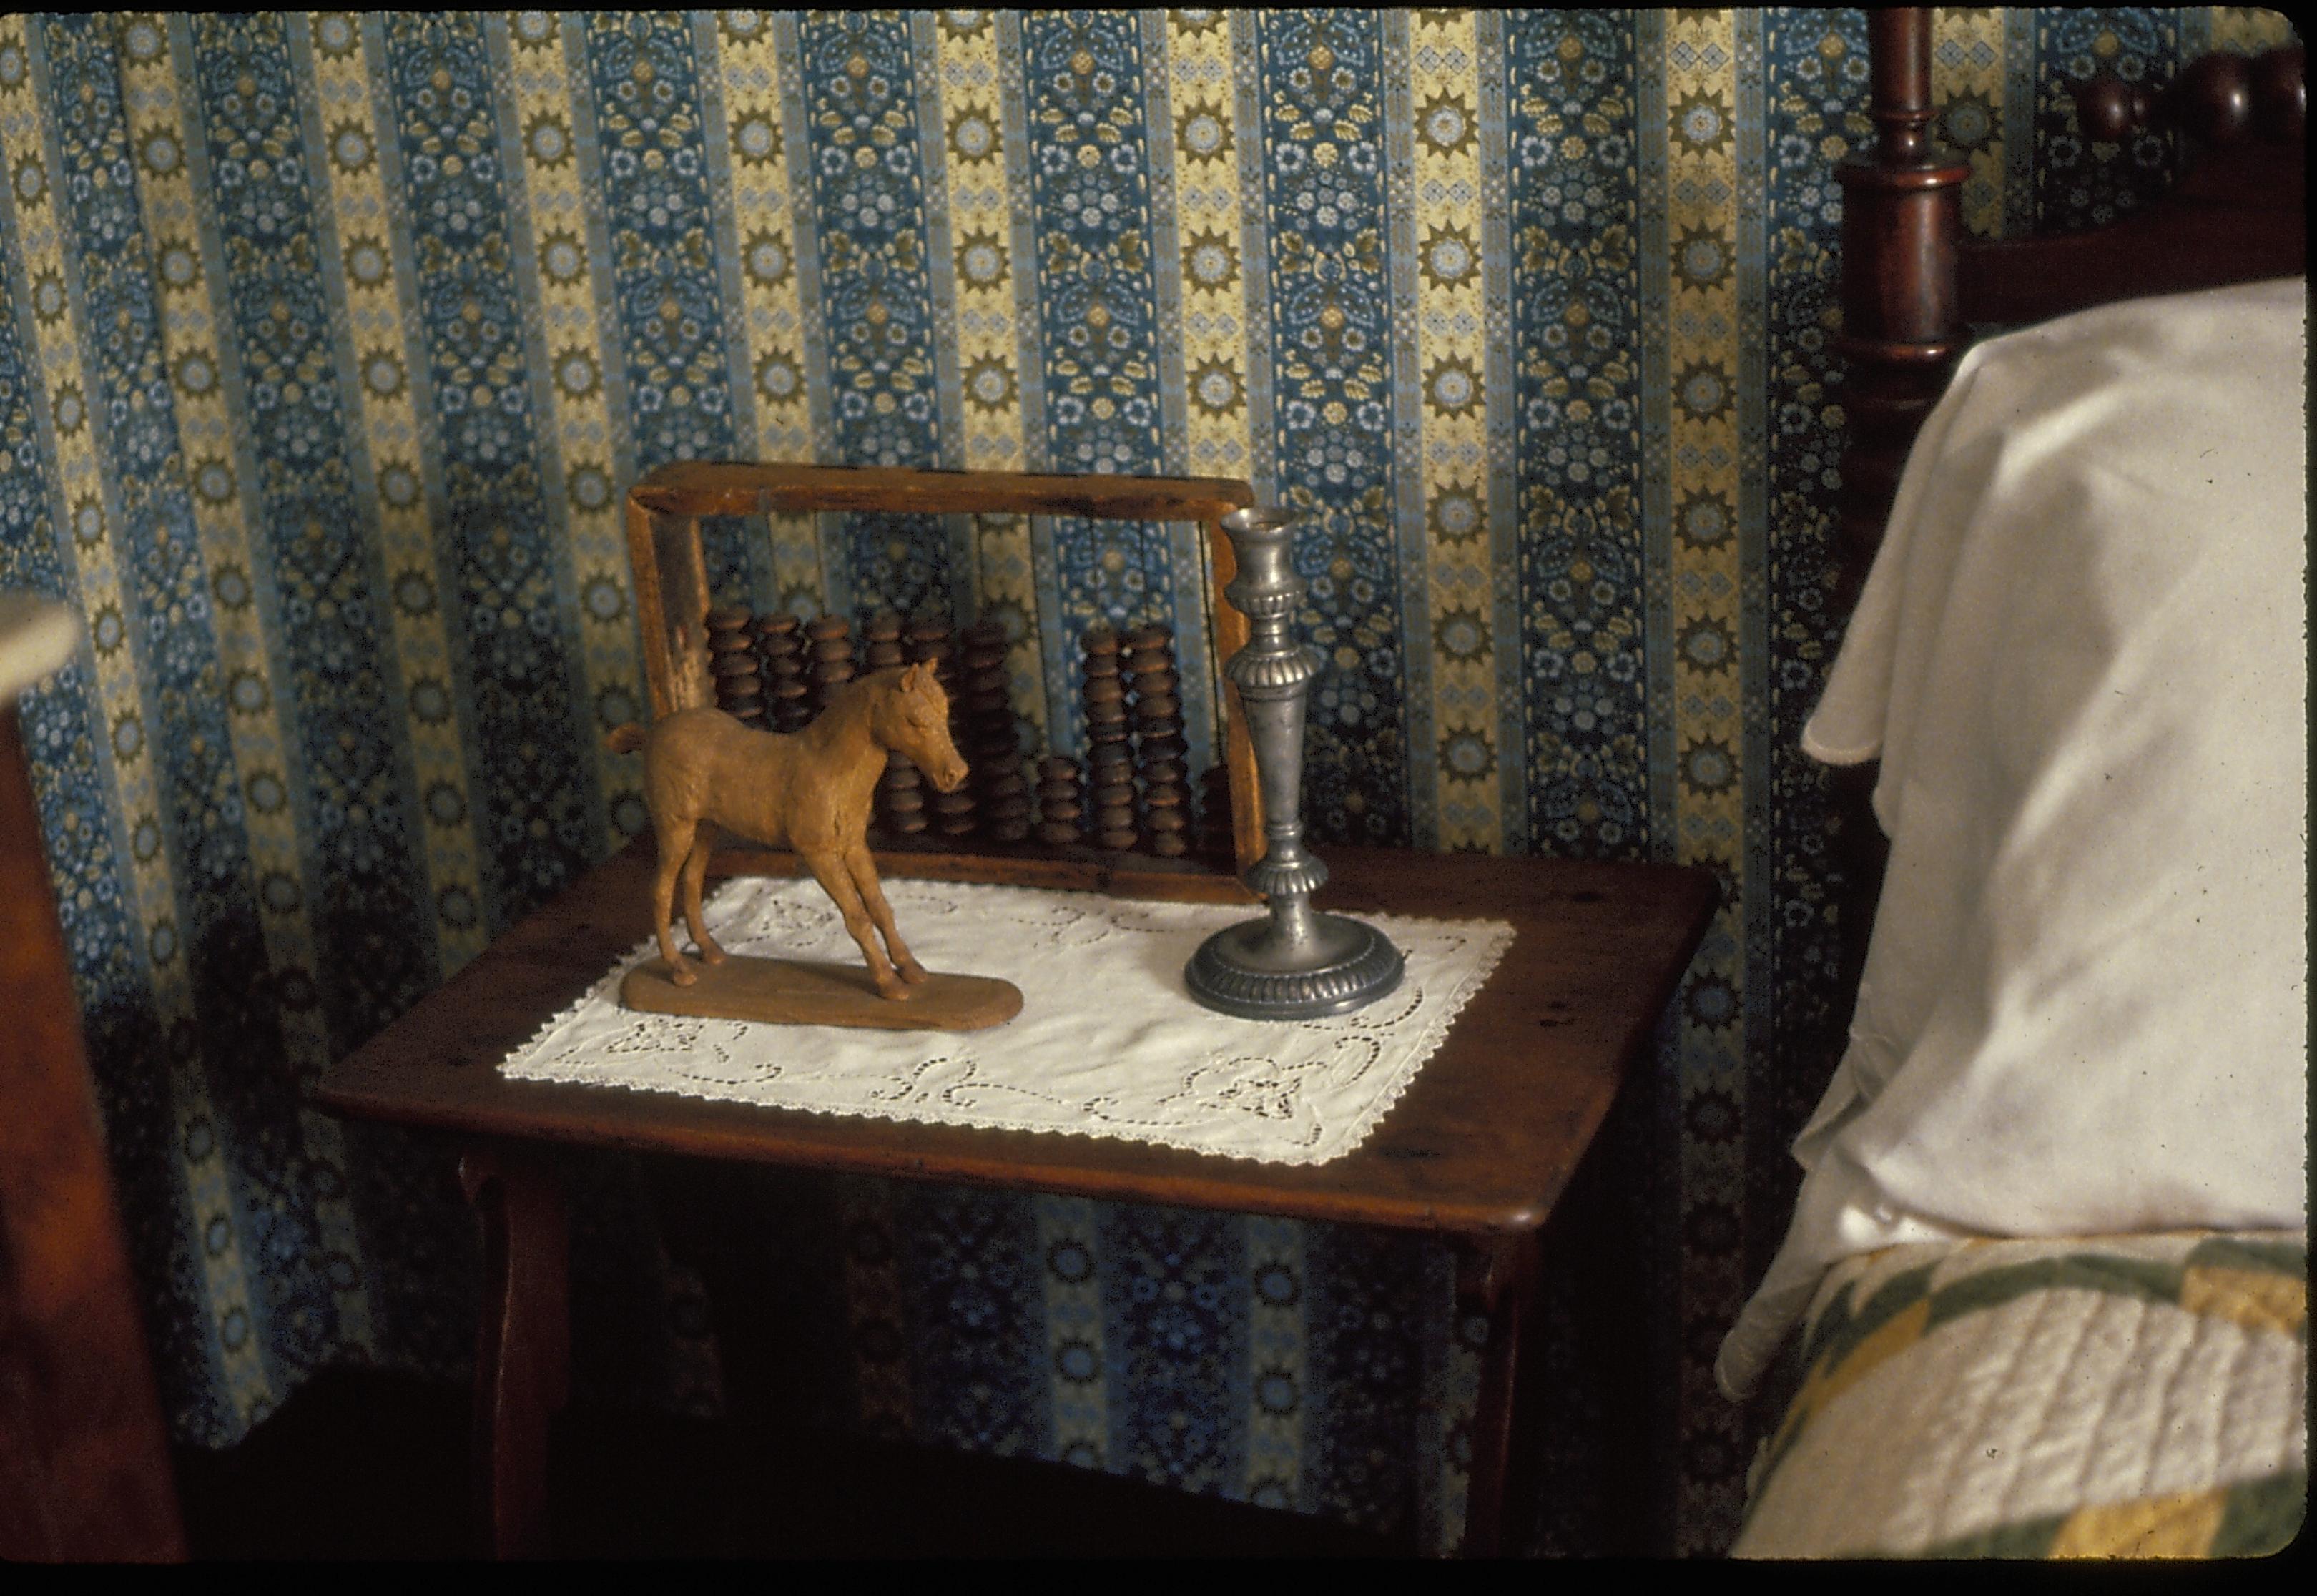 Boys Room, showing bedside table with a wooden horse toy, and abacus, and a pewter candlestick on a doily next to a bed with a white pillow and a green and yellow quilt. Heavily figured blue, yellow and white wallpaper on the walls